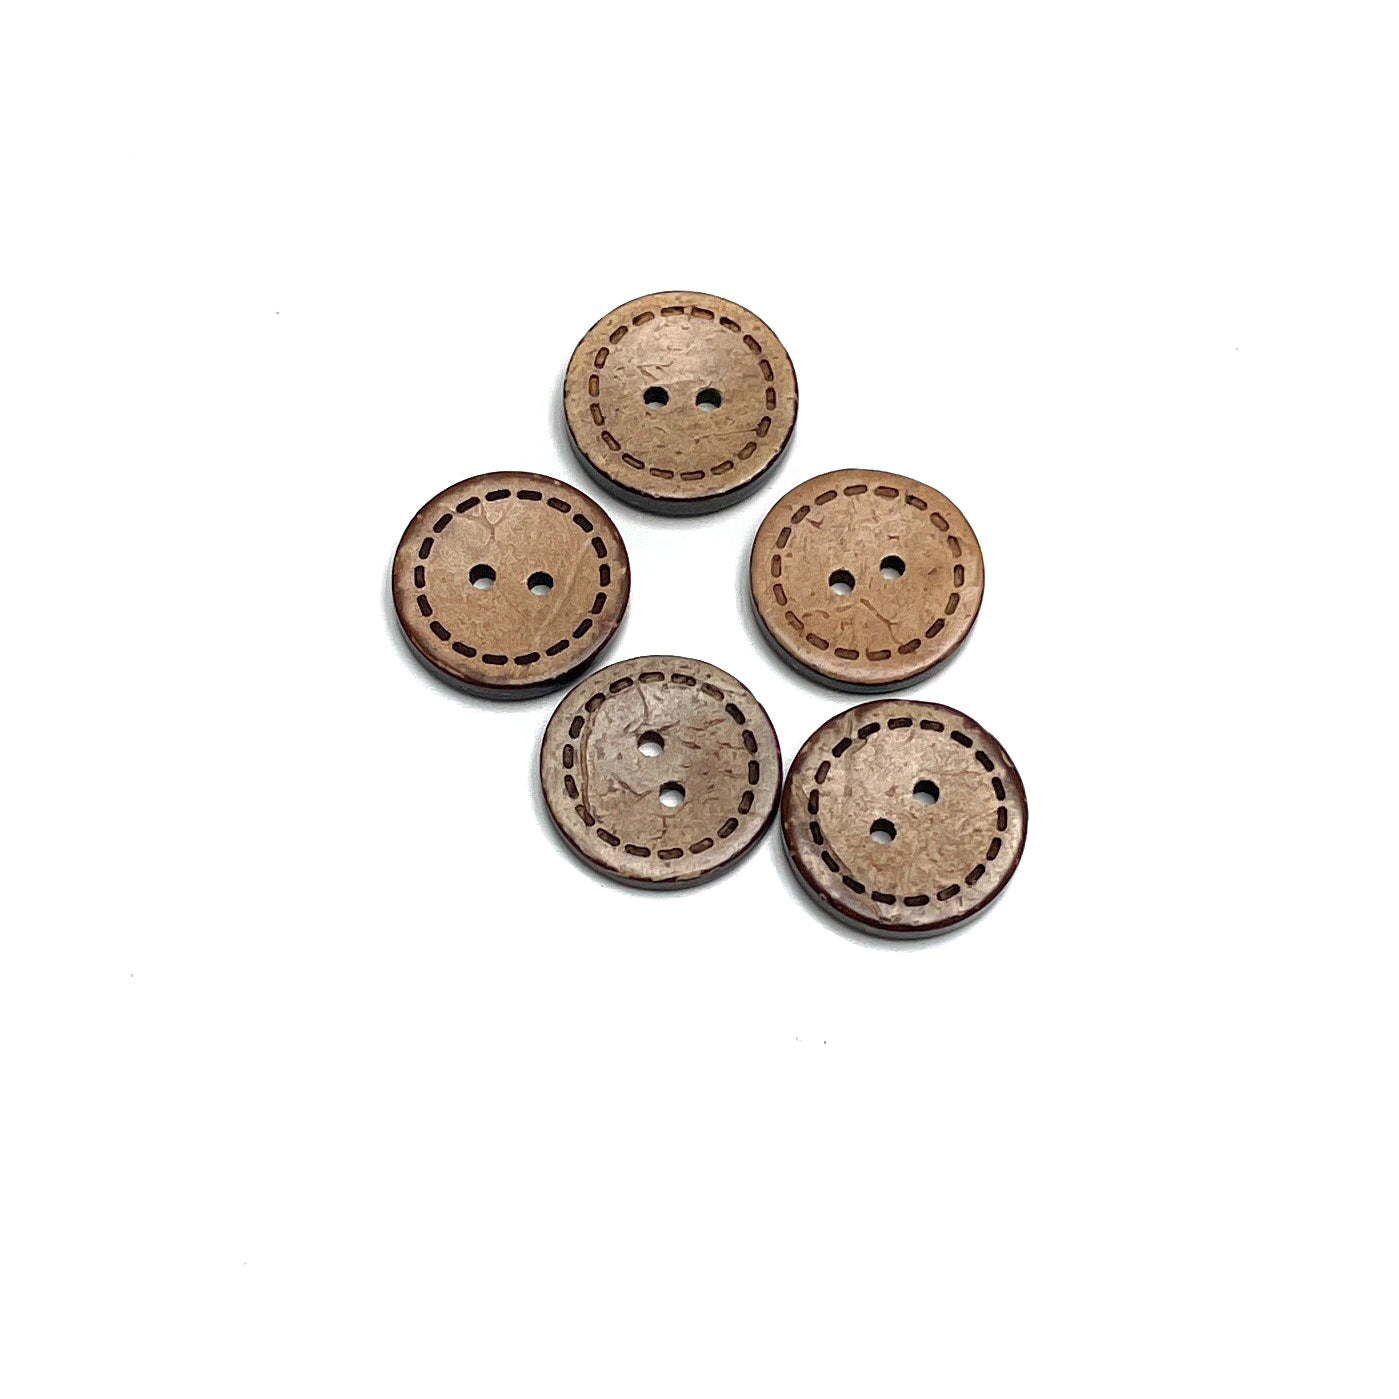 Sewing effect 2-hole round button 20 x 20 mm - Coconut button